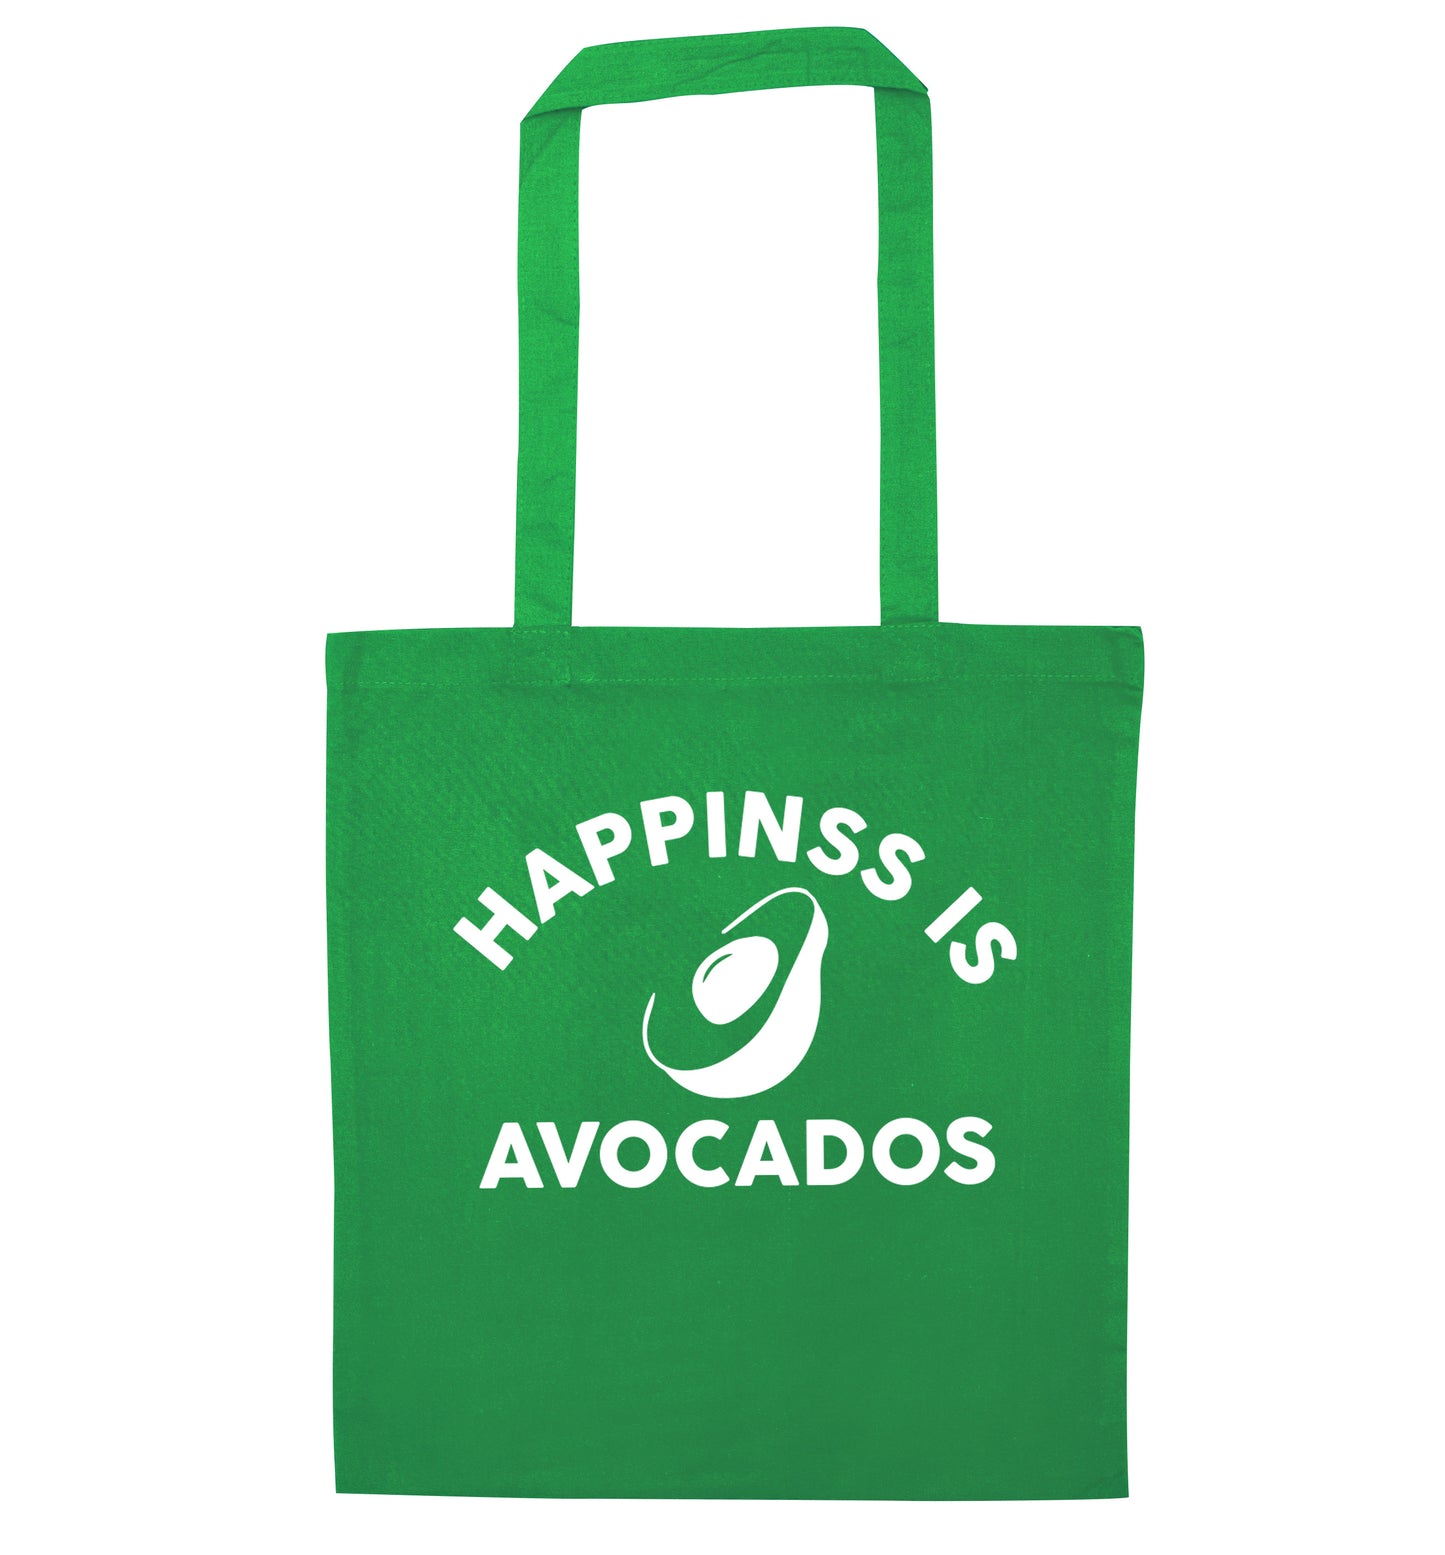 Happiness is avocados green tote bag